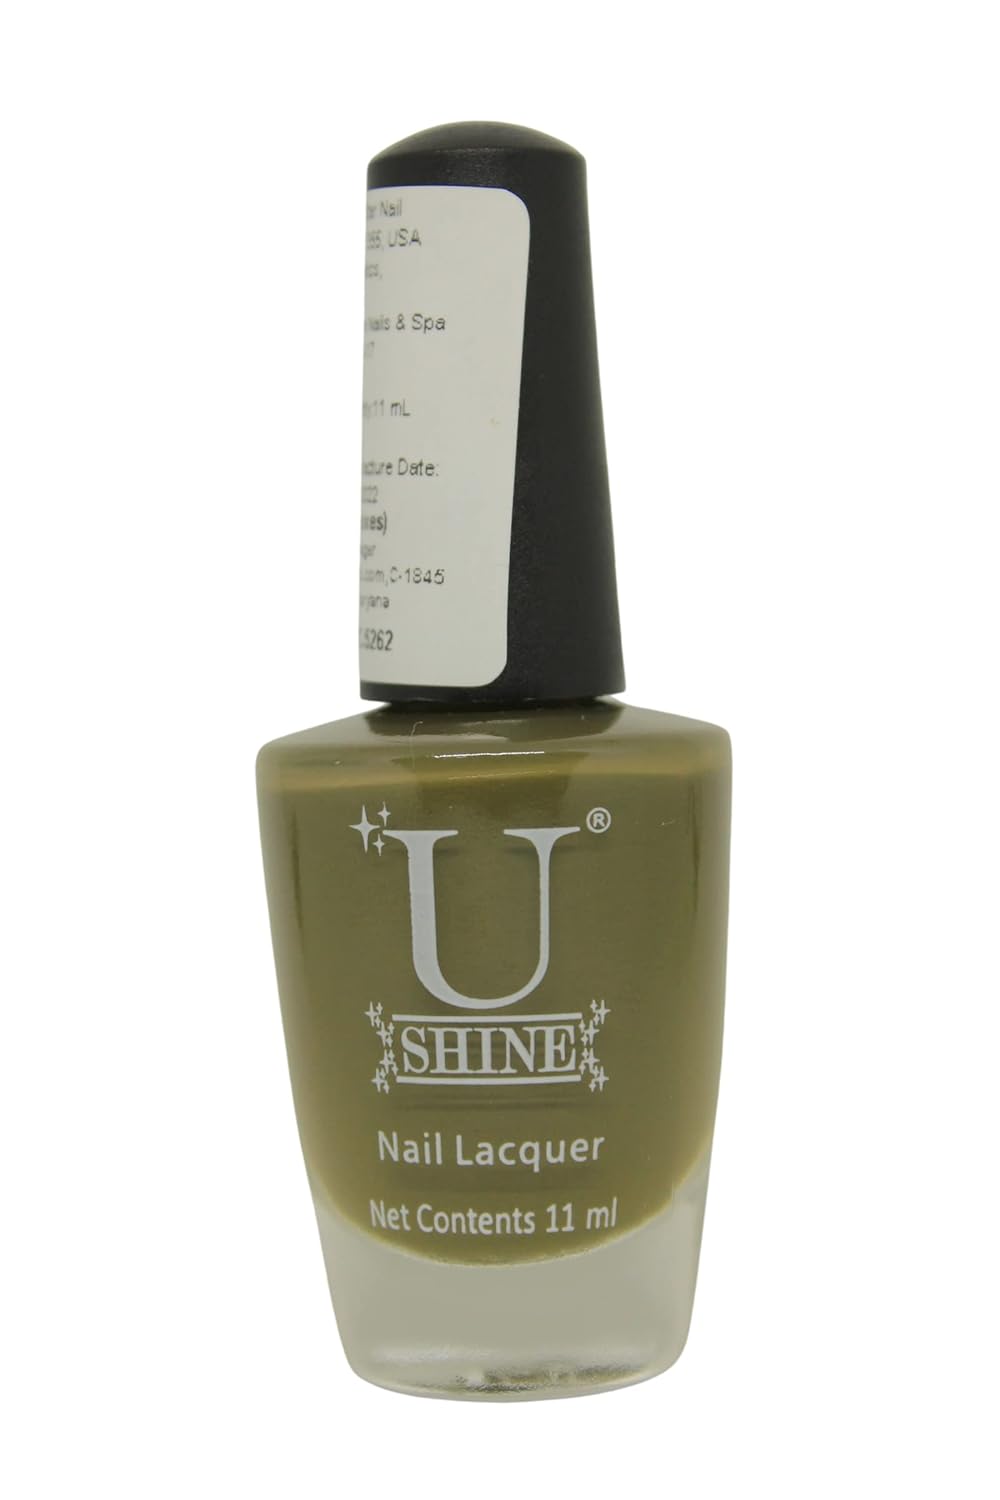 U Shine Men in Olives|Olive|Crème|11ml |No Paraben, Nail Yellowing, Chipping or Cracking & Long Wear | Vegan & FREE from Harmful Chemicals